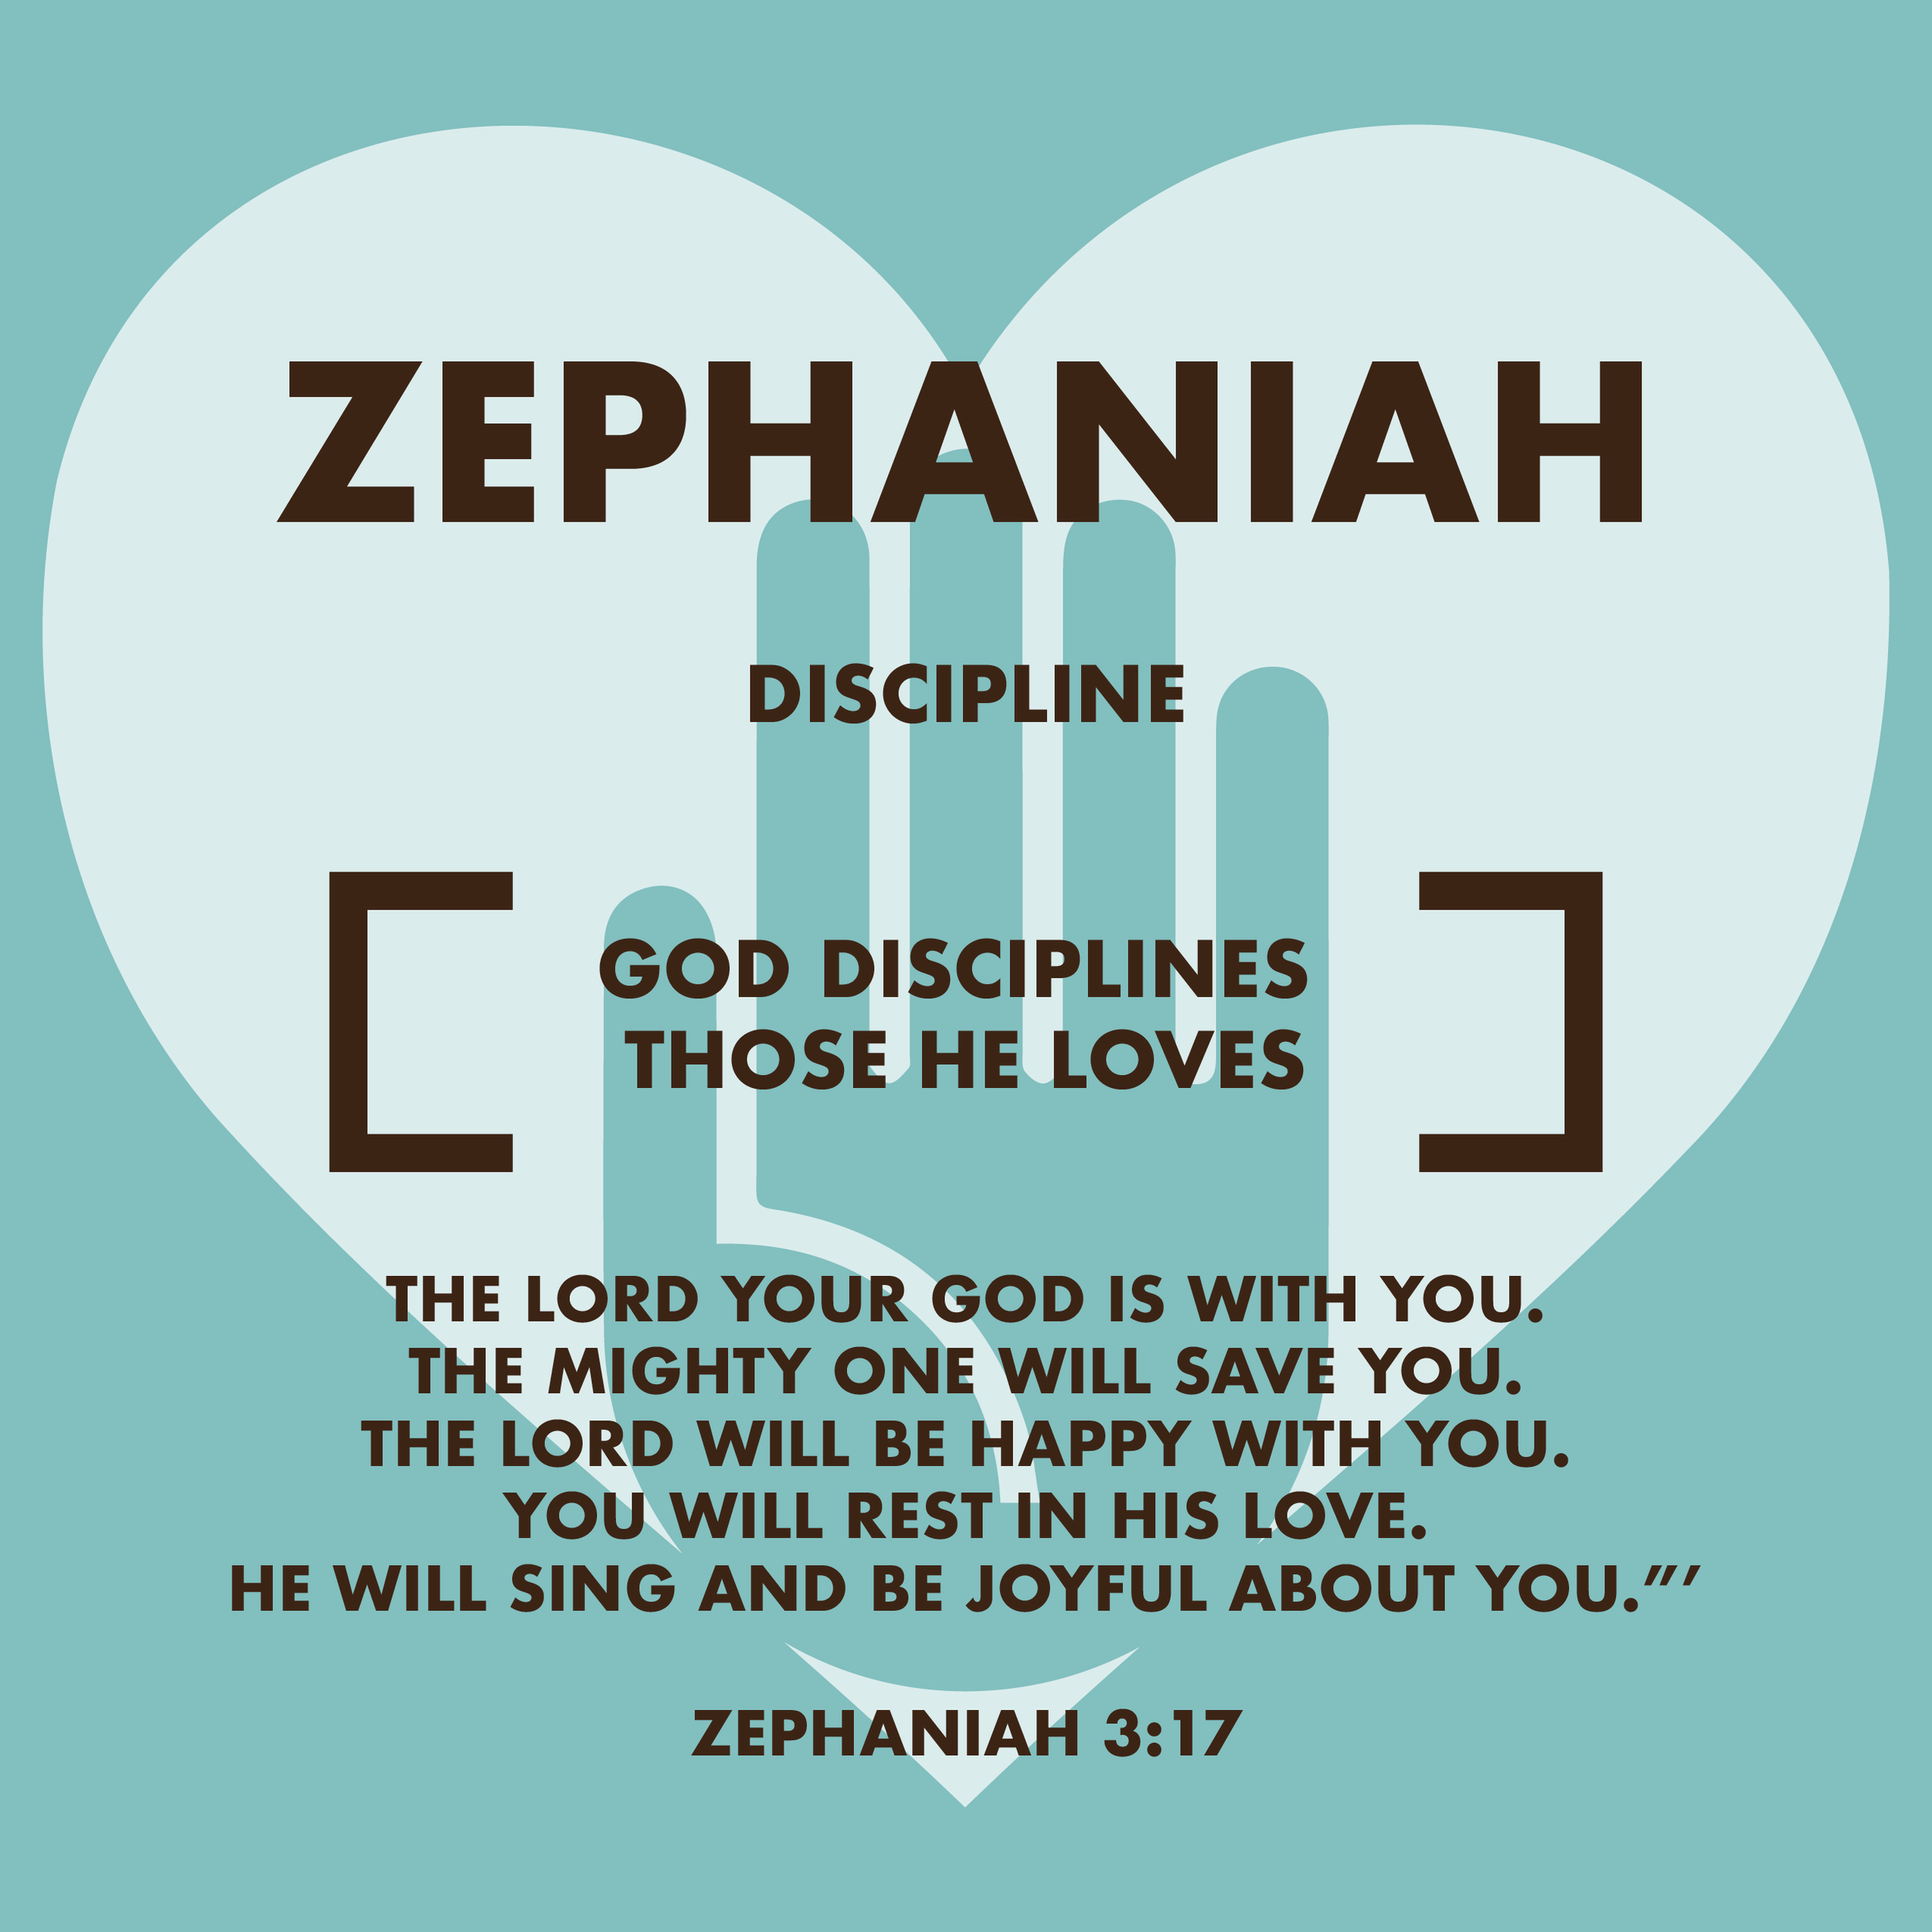 Books of the Bible_posters_34 Zephaniah.png